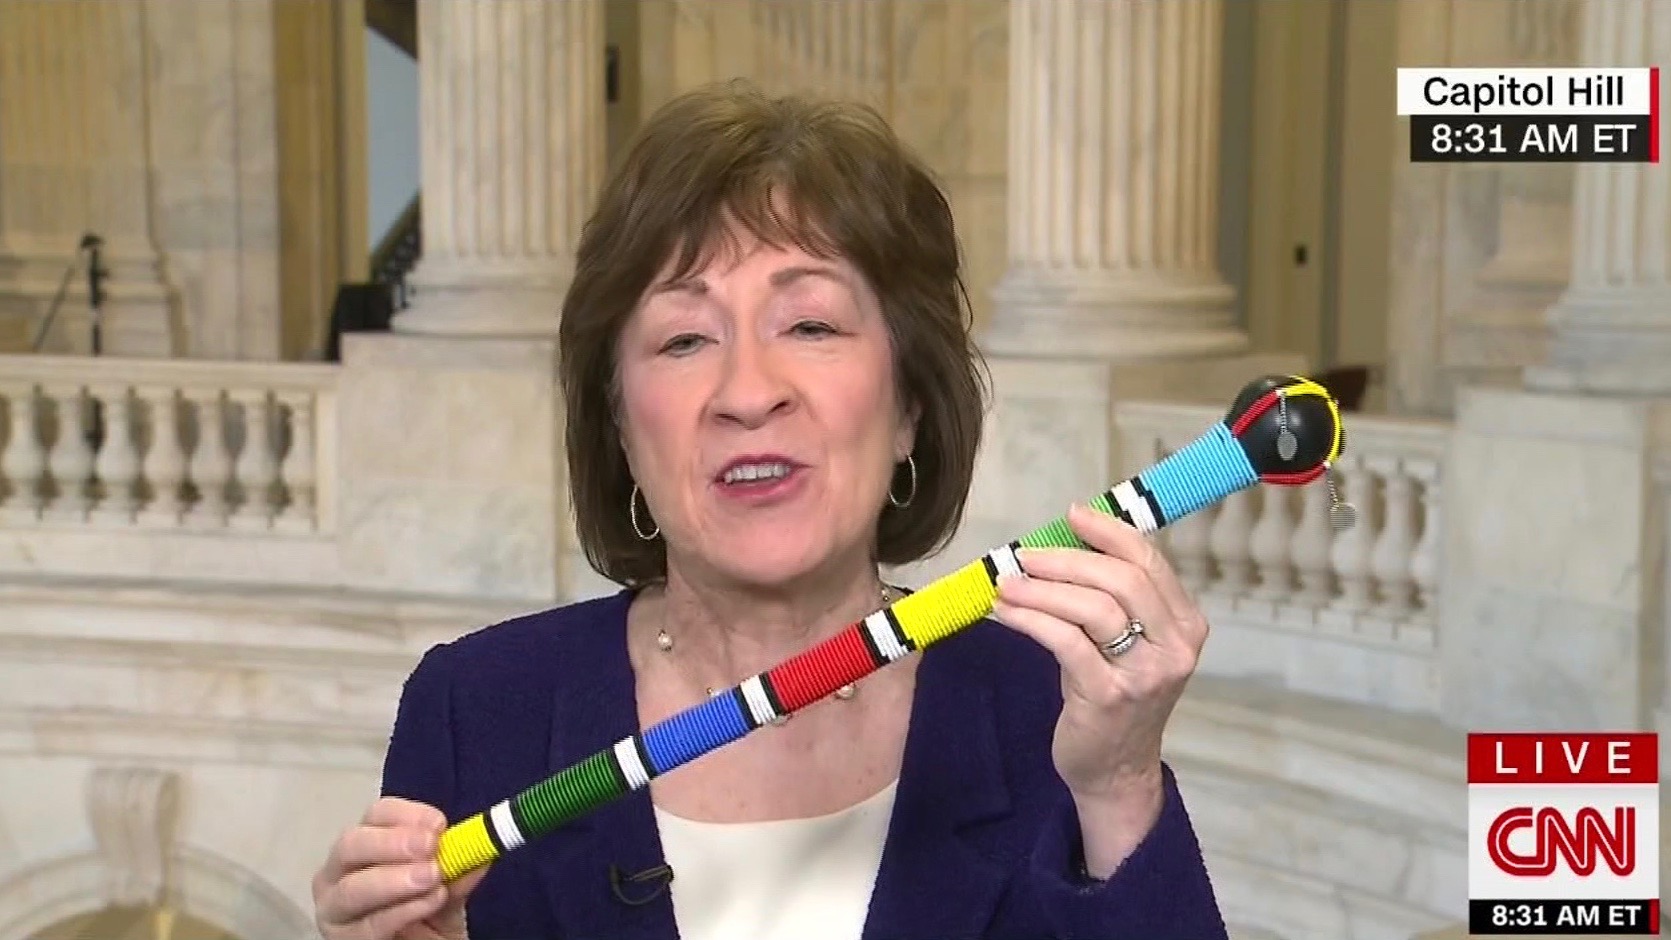 Sorry but that 'talking stick' used in the Senate isn't Native American